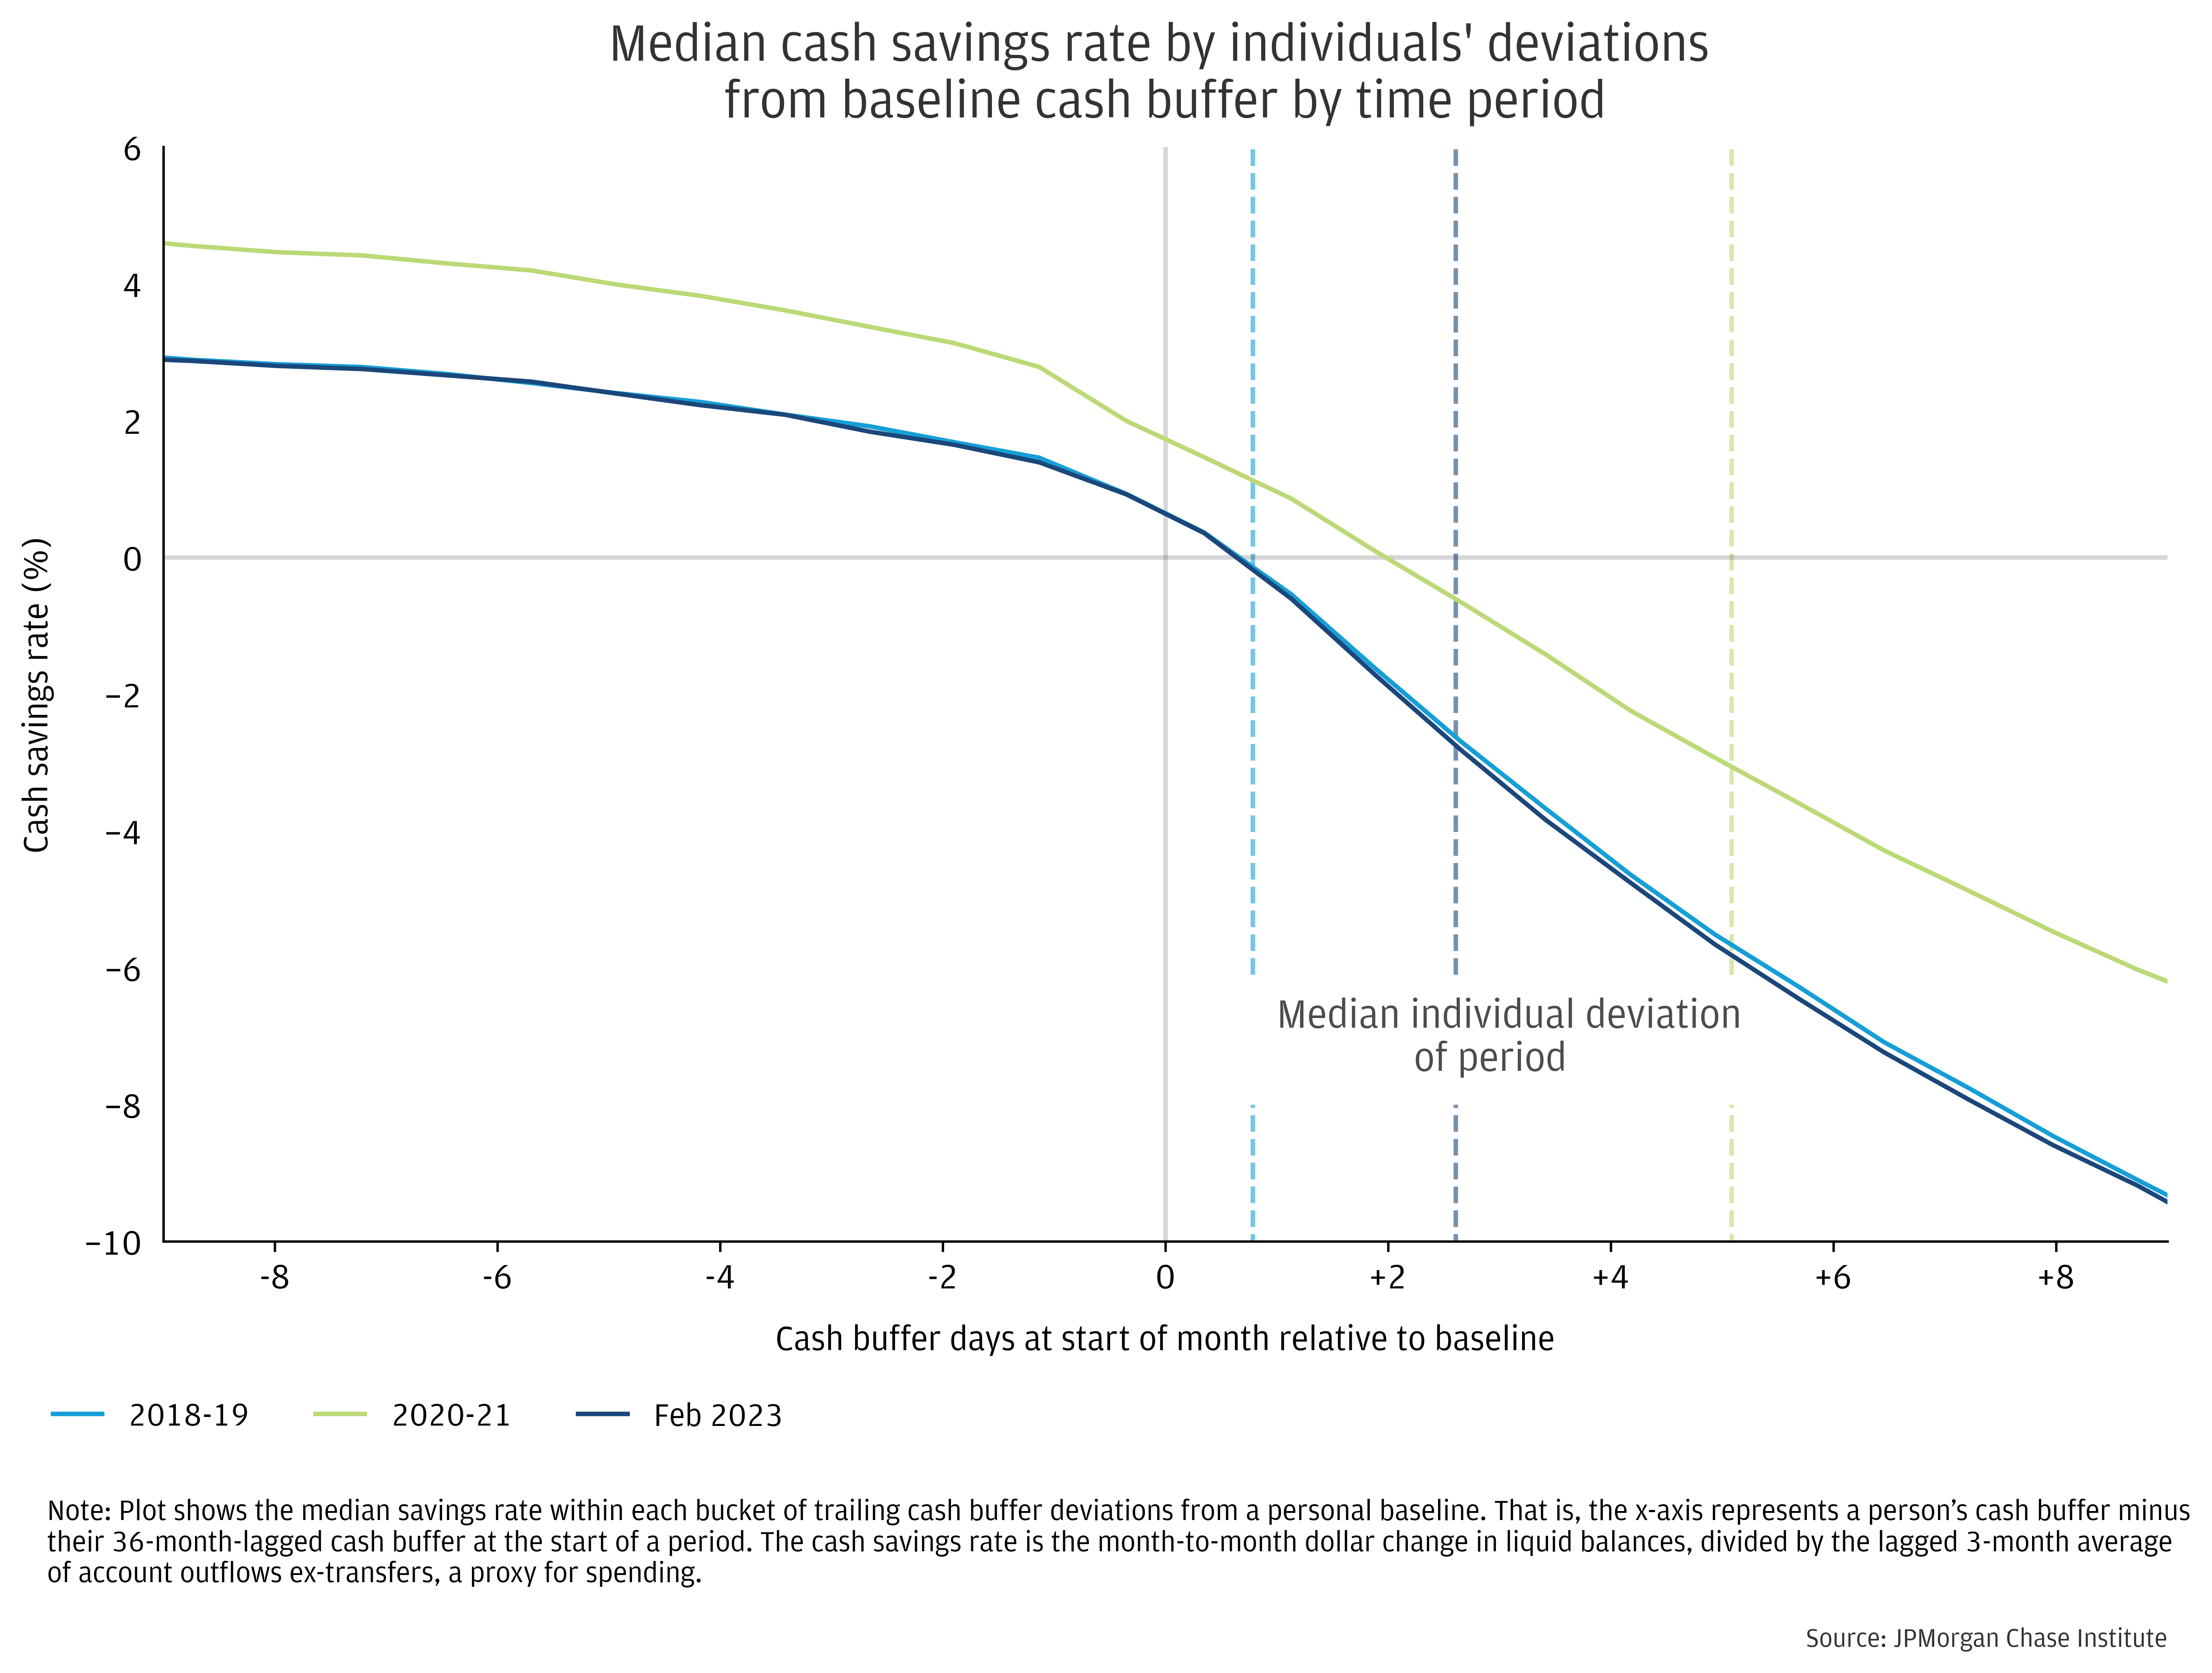 Median cash savings rates by individuals’ deviations from baseline cash buffer